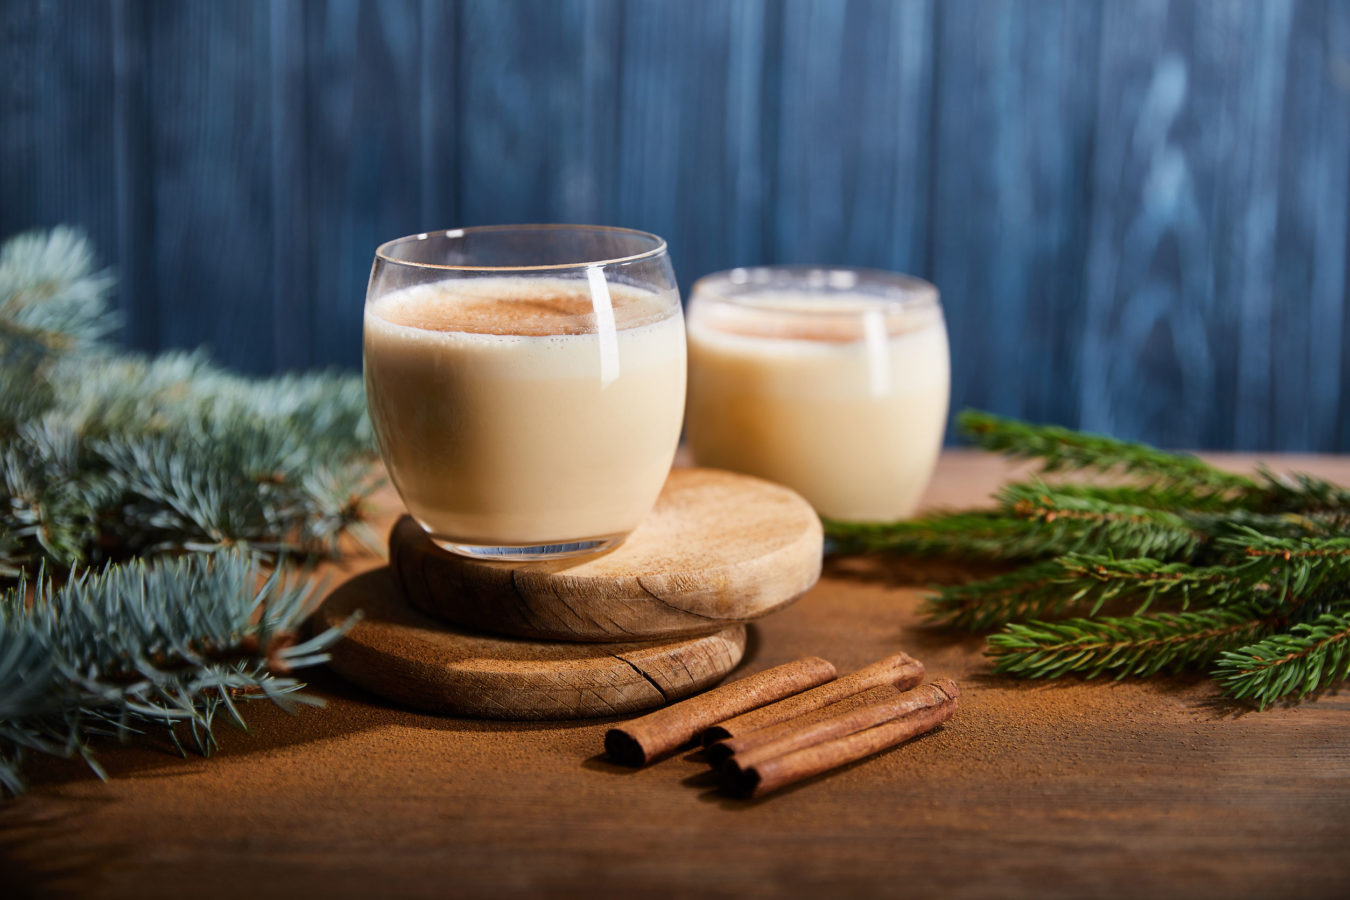 tasty eggnog cocktail on round wooden boards near spruce branches and cinnamon sticks on blue textured background